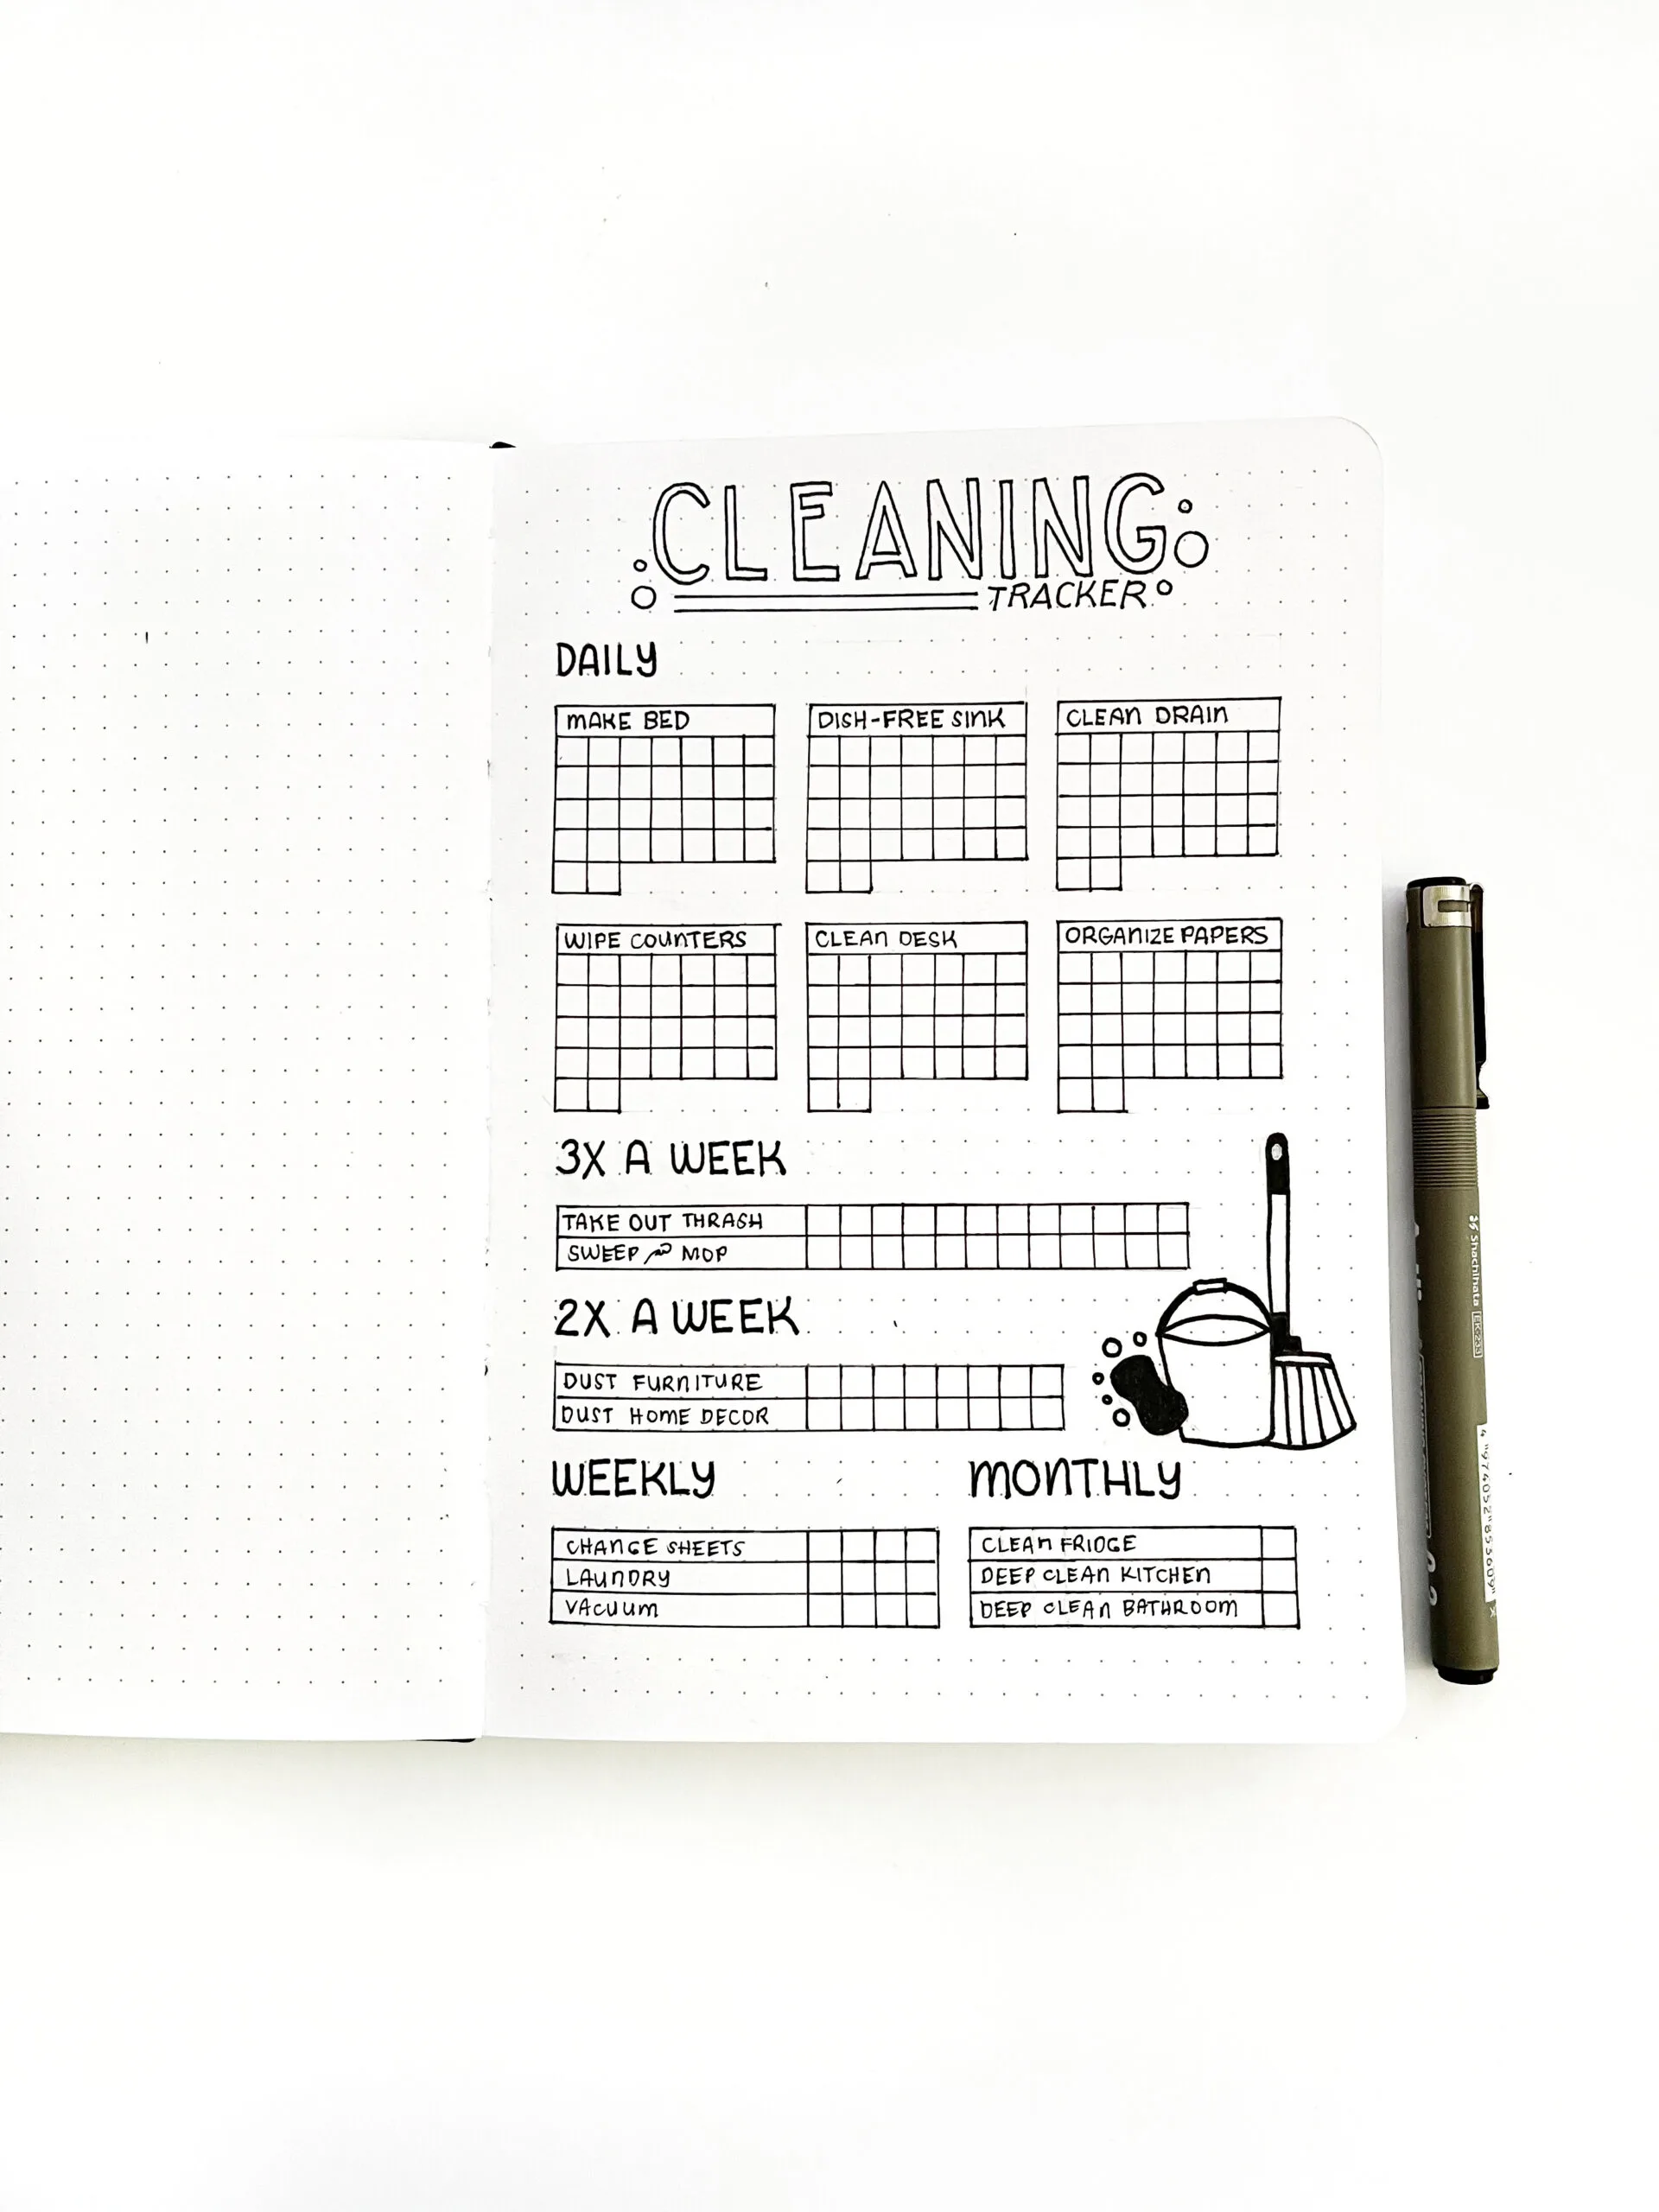 Each chore titled in the cleaning tracker using a pen in a bullet journal.